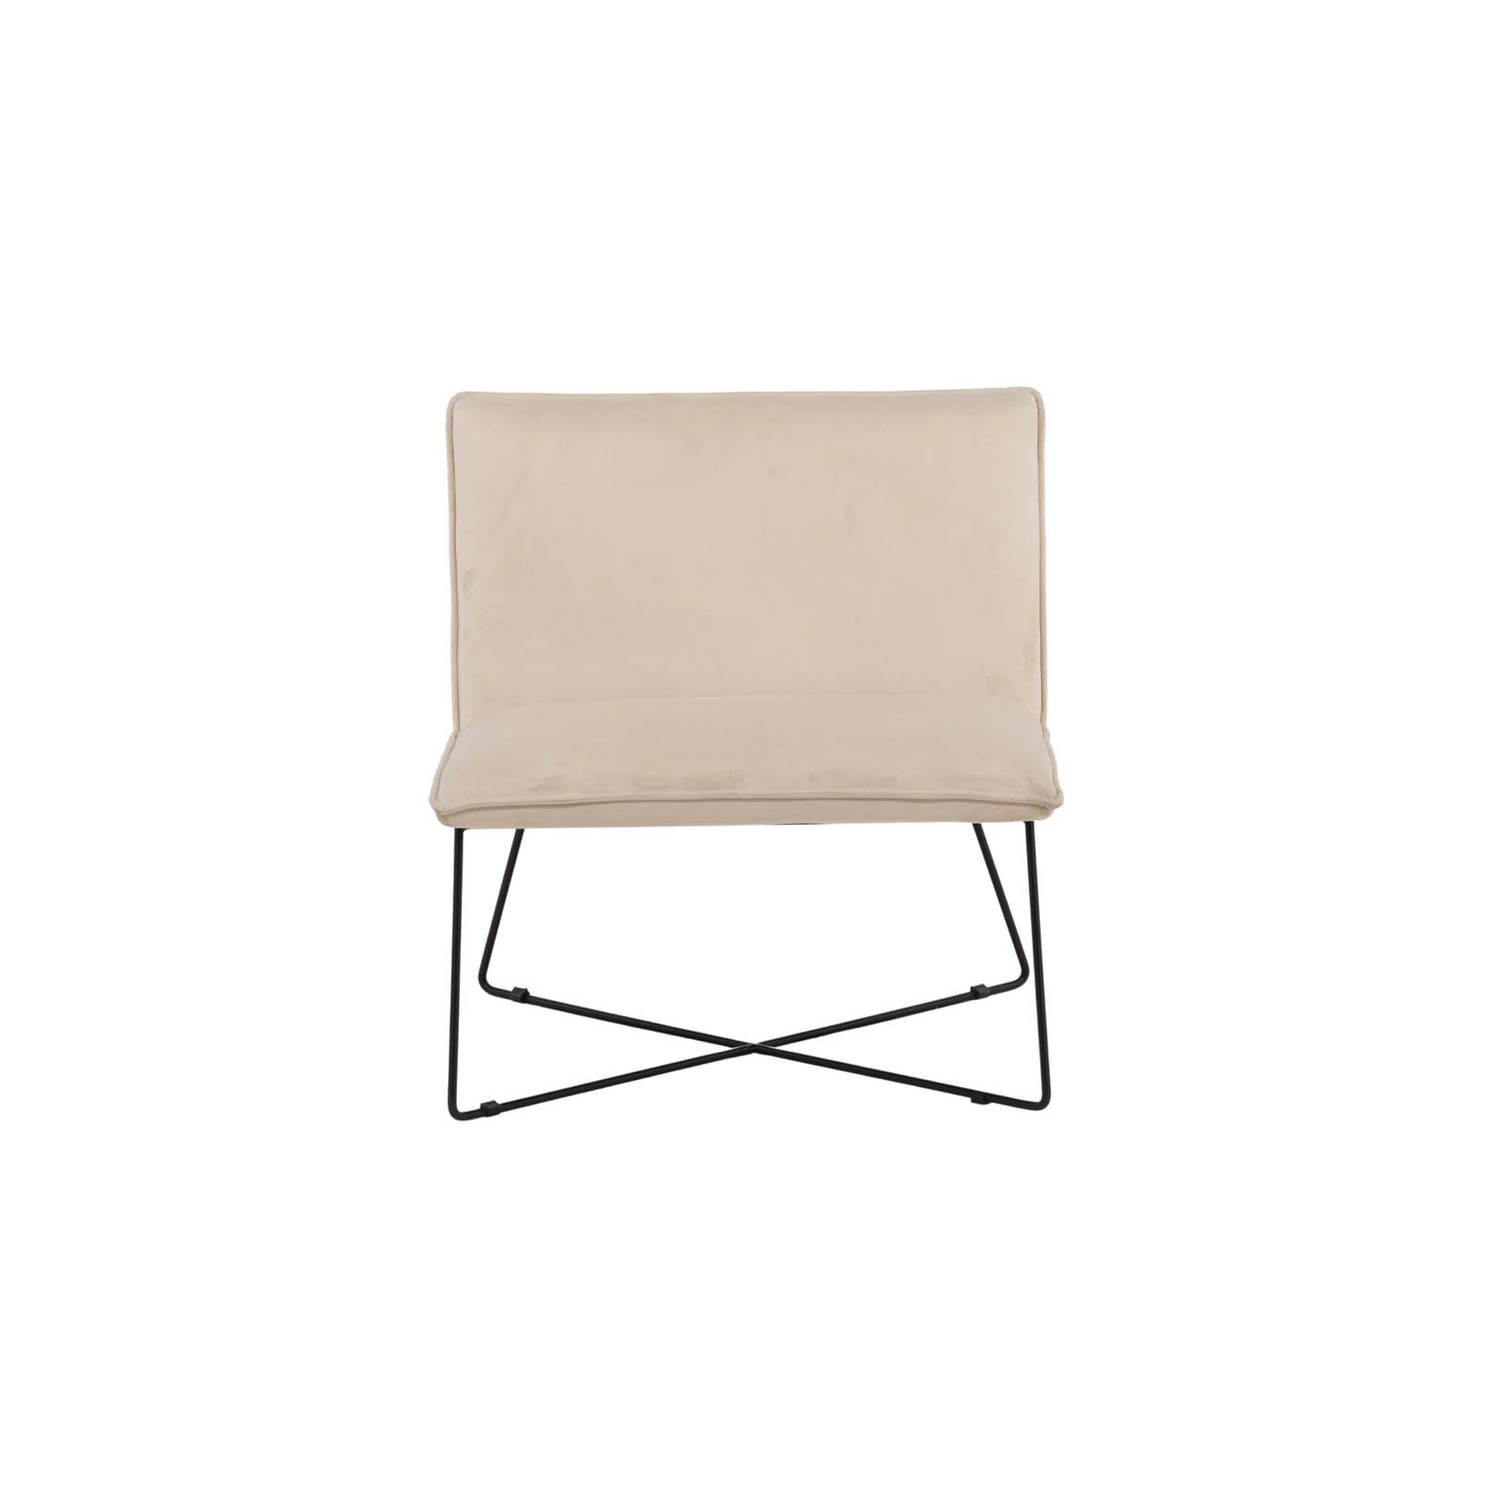 X-lounge fauteuil velours offwhite.